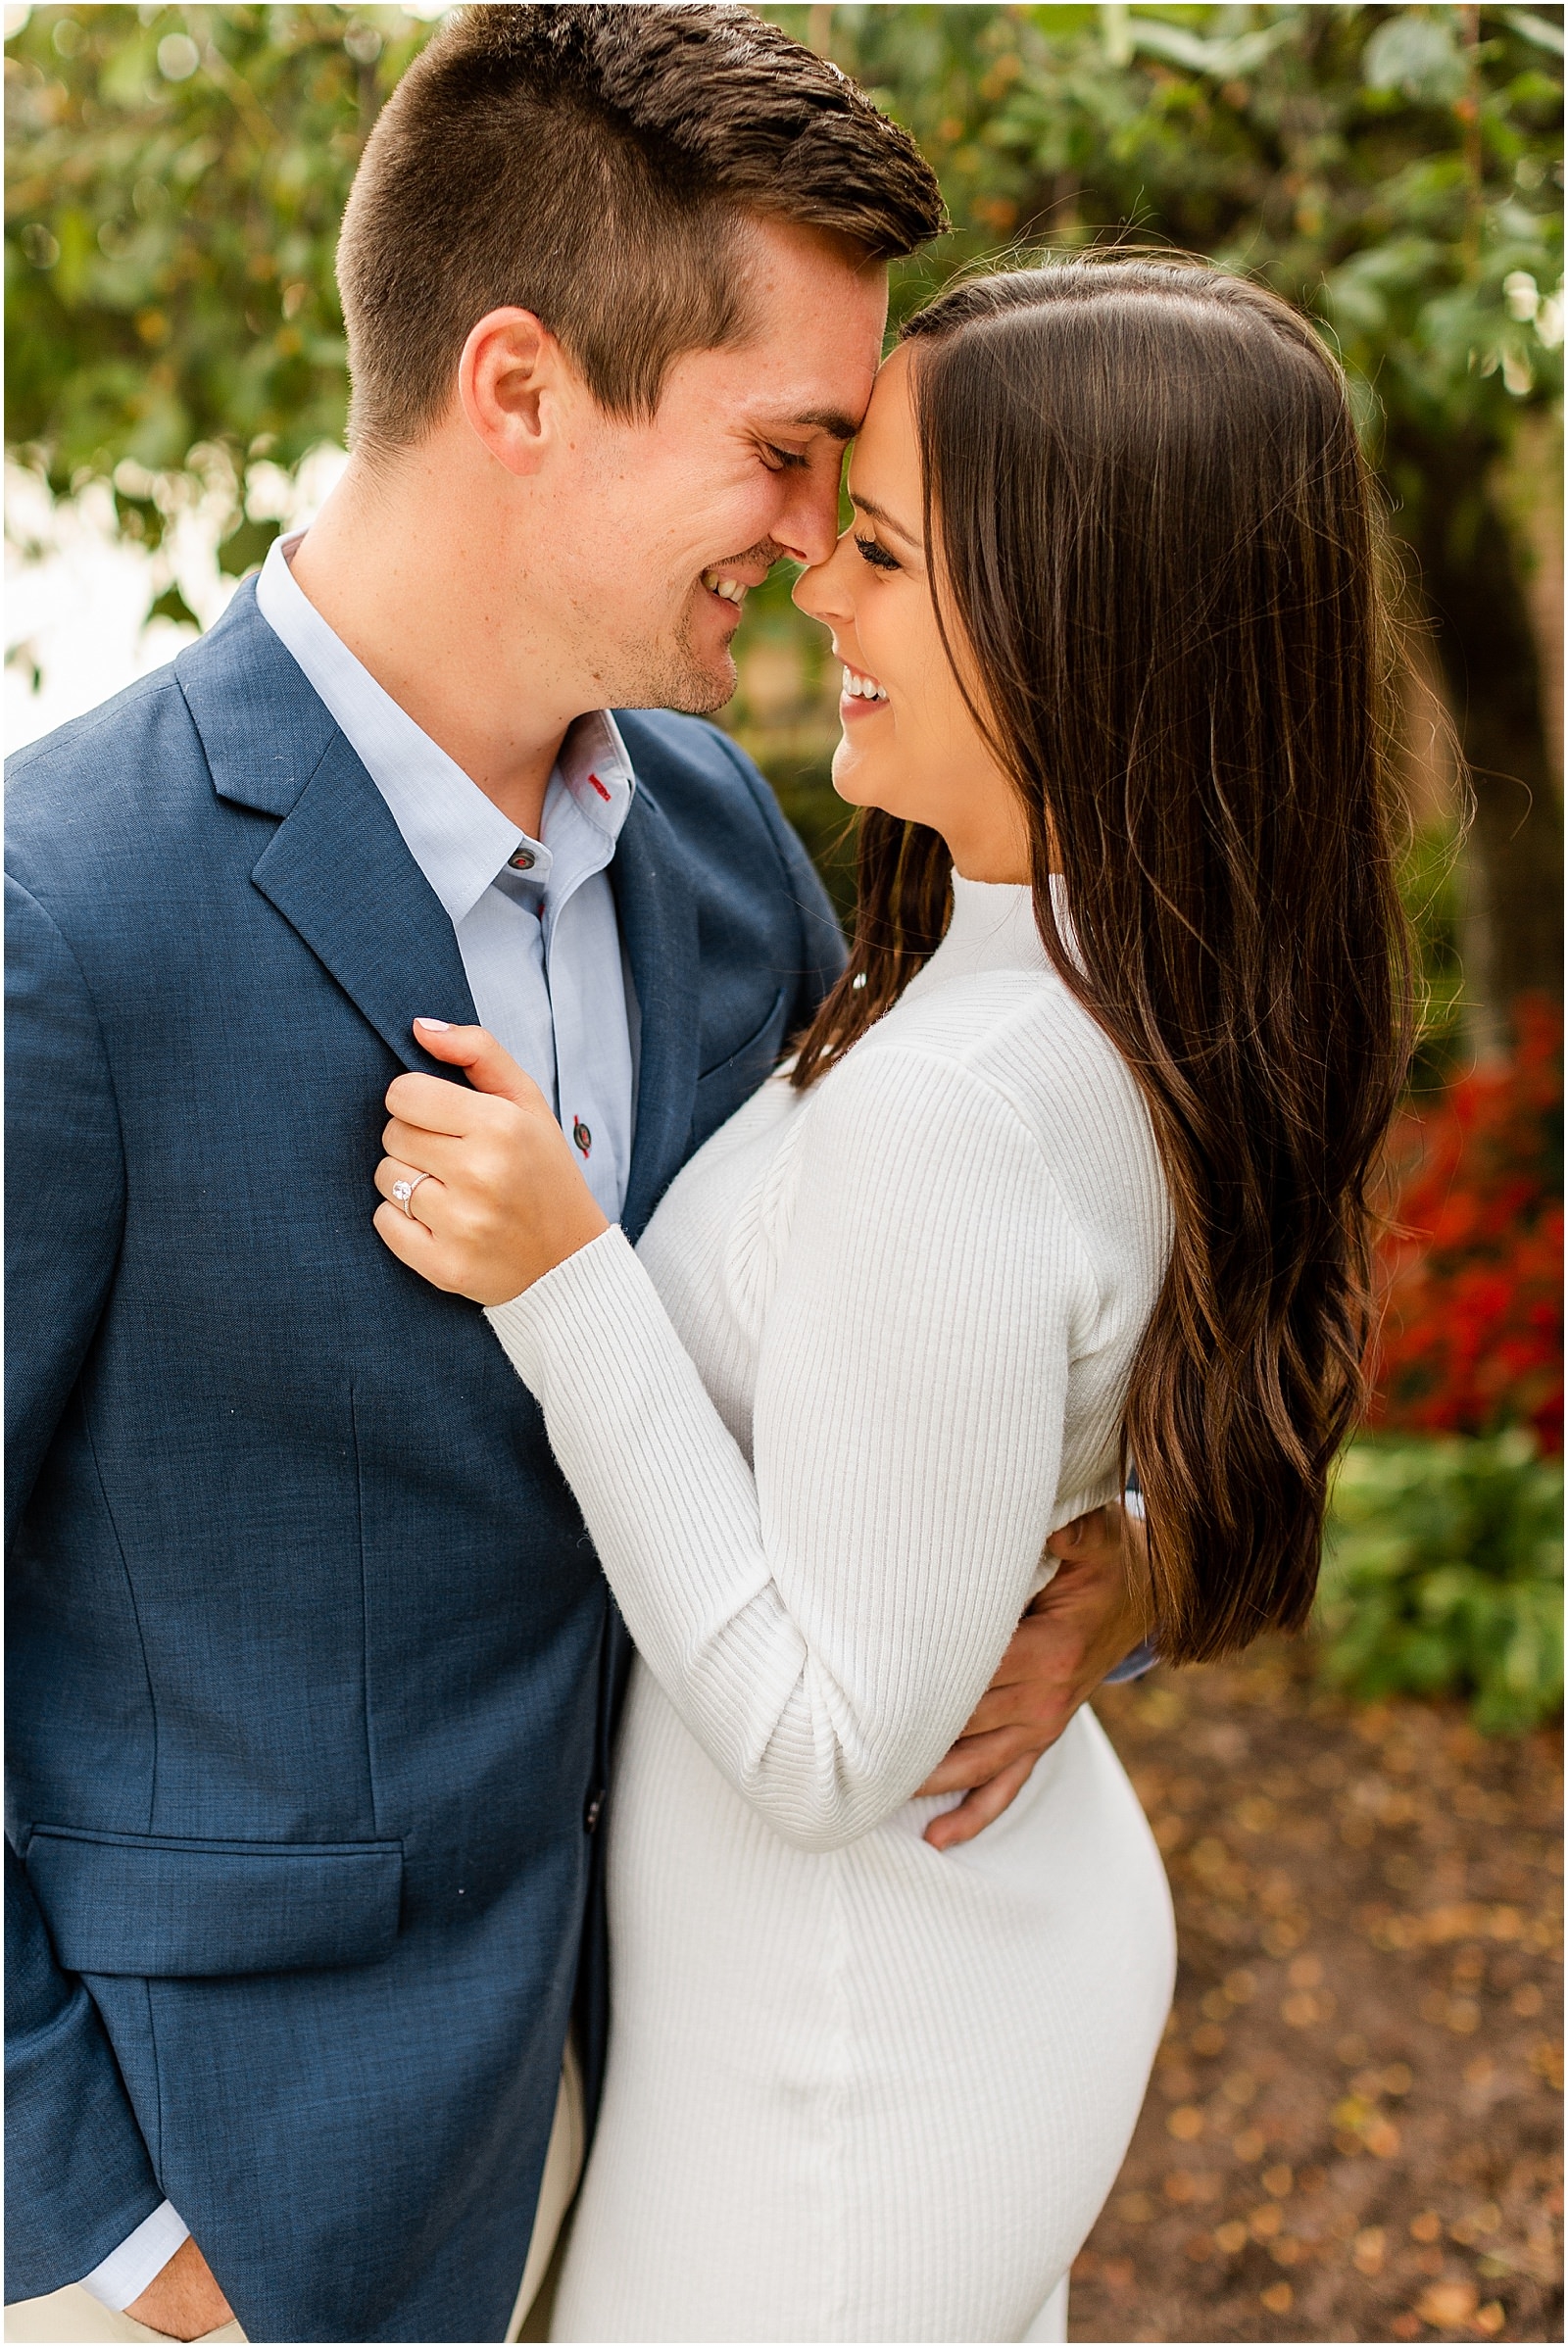 Emma and Jace's Downtown Newburgh Engagement Session | Bret and Brandie Photography | Evansville Indiana Wedding Photographers_0007.jpg